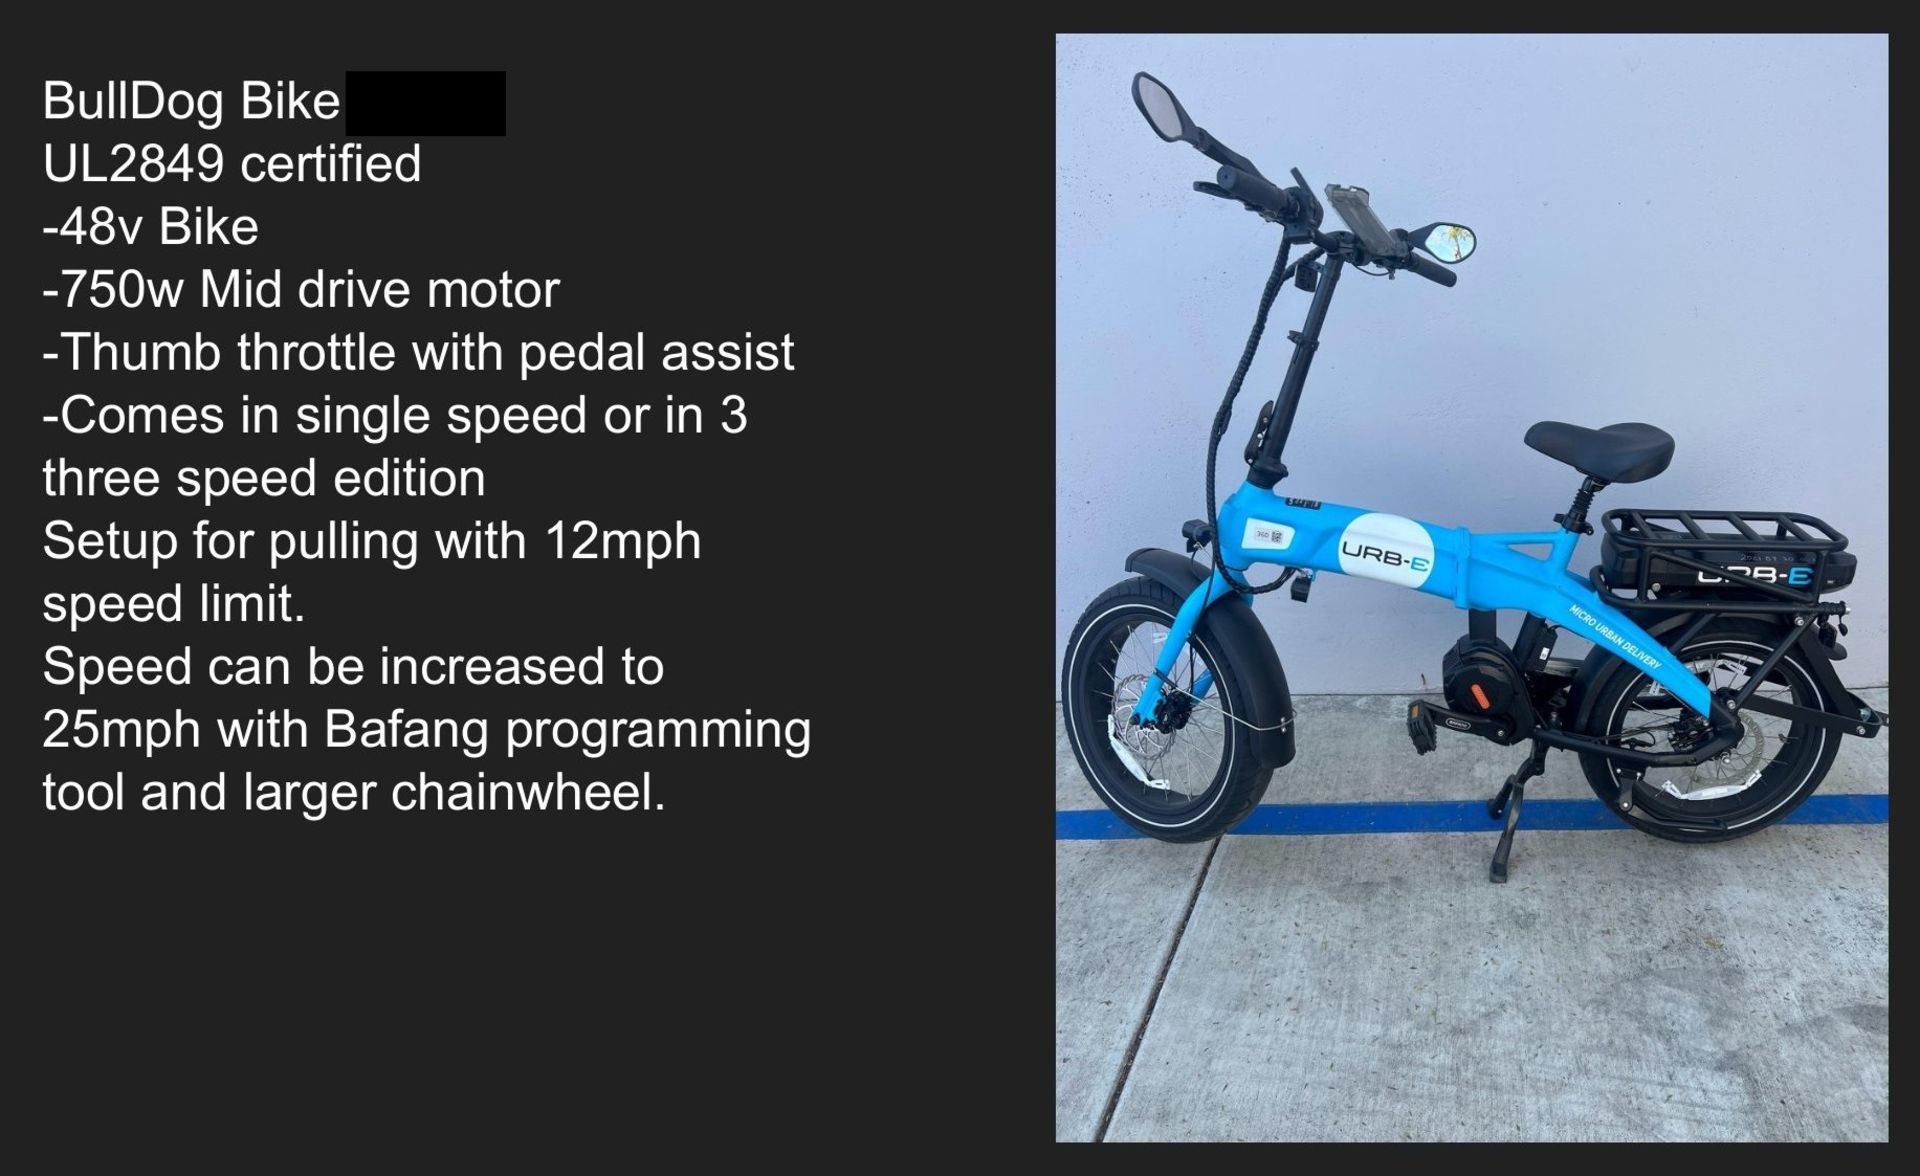 URB-E ELECTRIC DELIVERY BIKE, USED, 750W MID DRIVE MOTOR, SINGLE SPEED, THUMB THROTTLE WITH PEDAL - Image 3 of 3